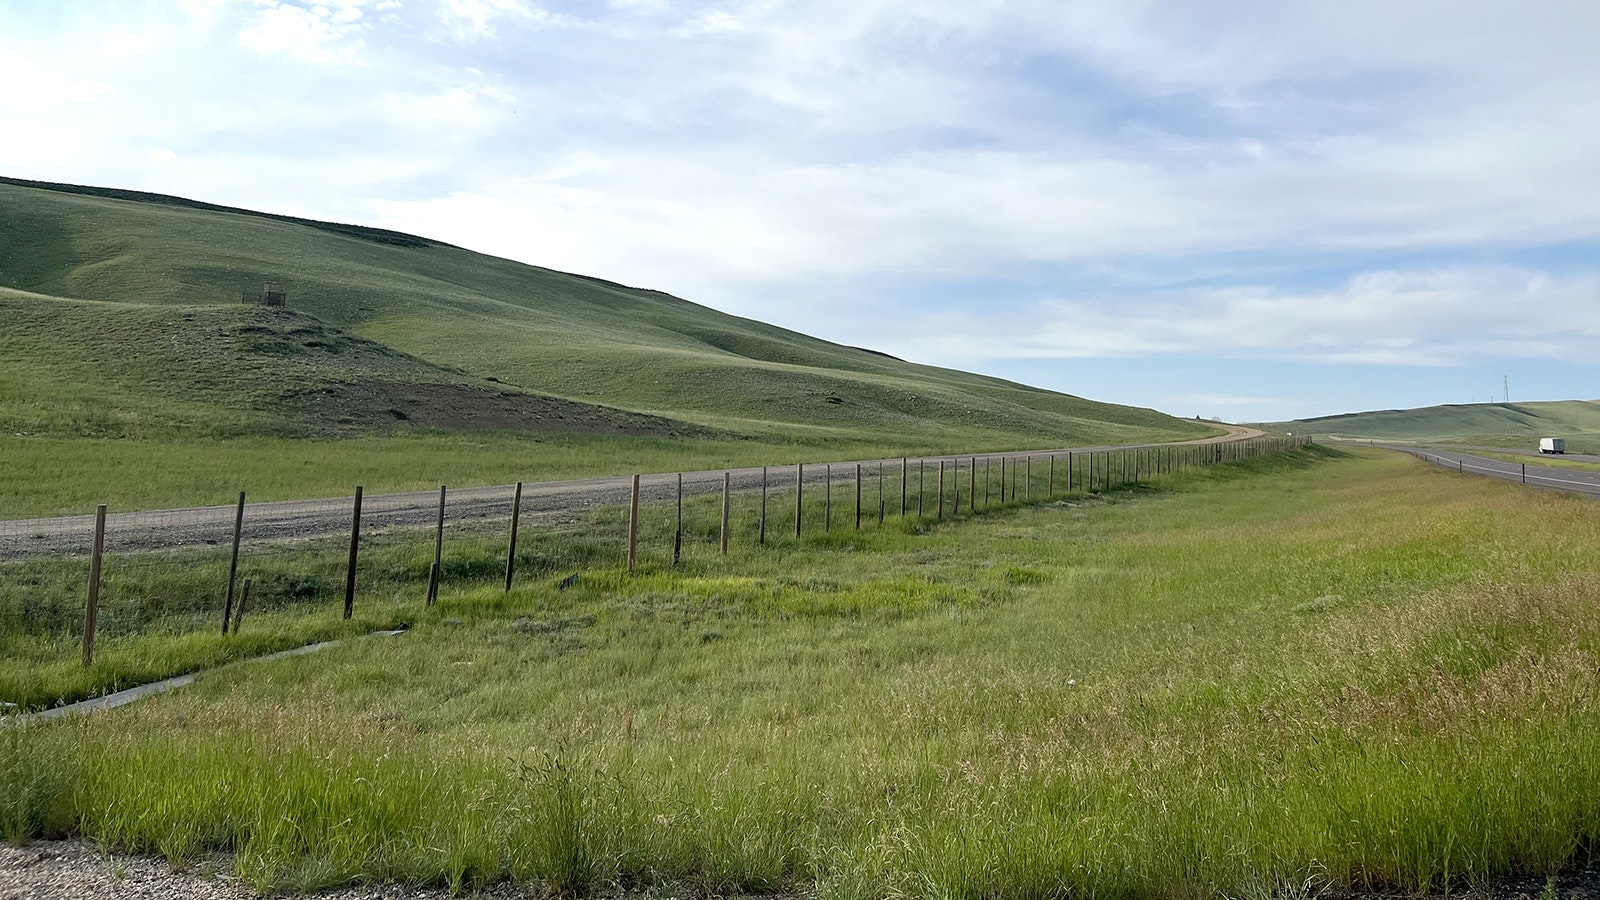 Much of the vast stretches of Wyoming grasslands remain relatively green and lush in mid-August.